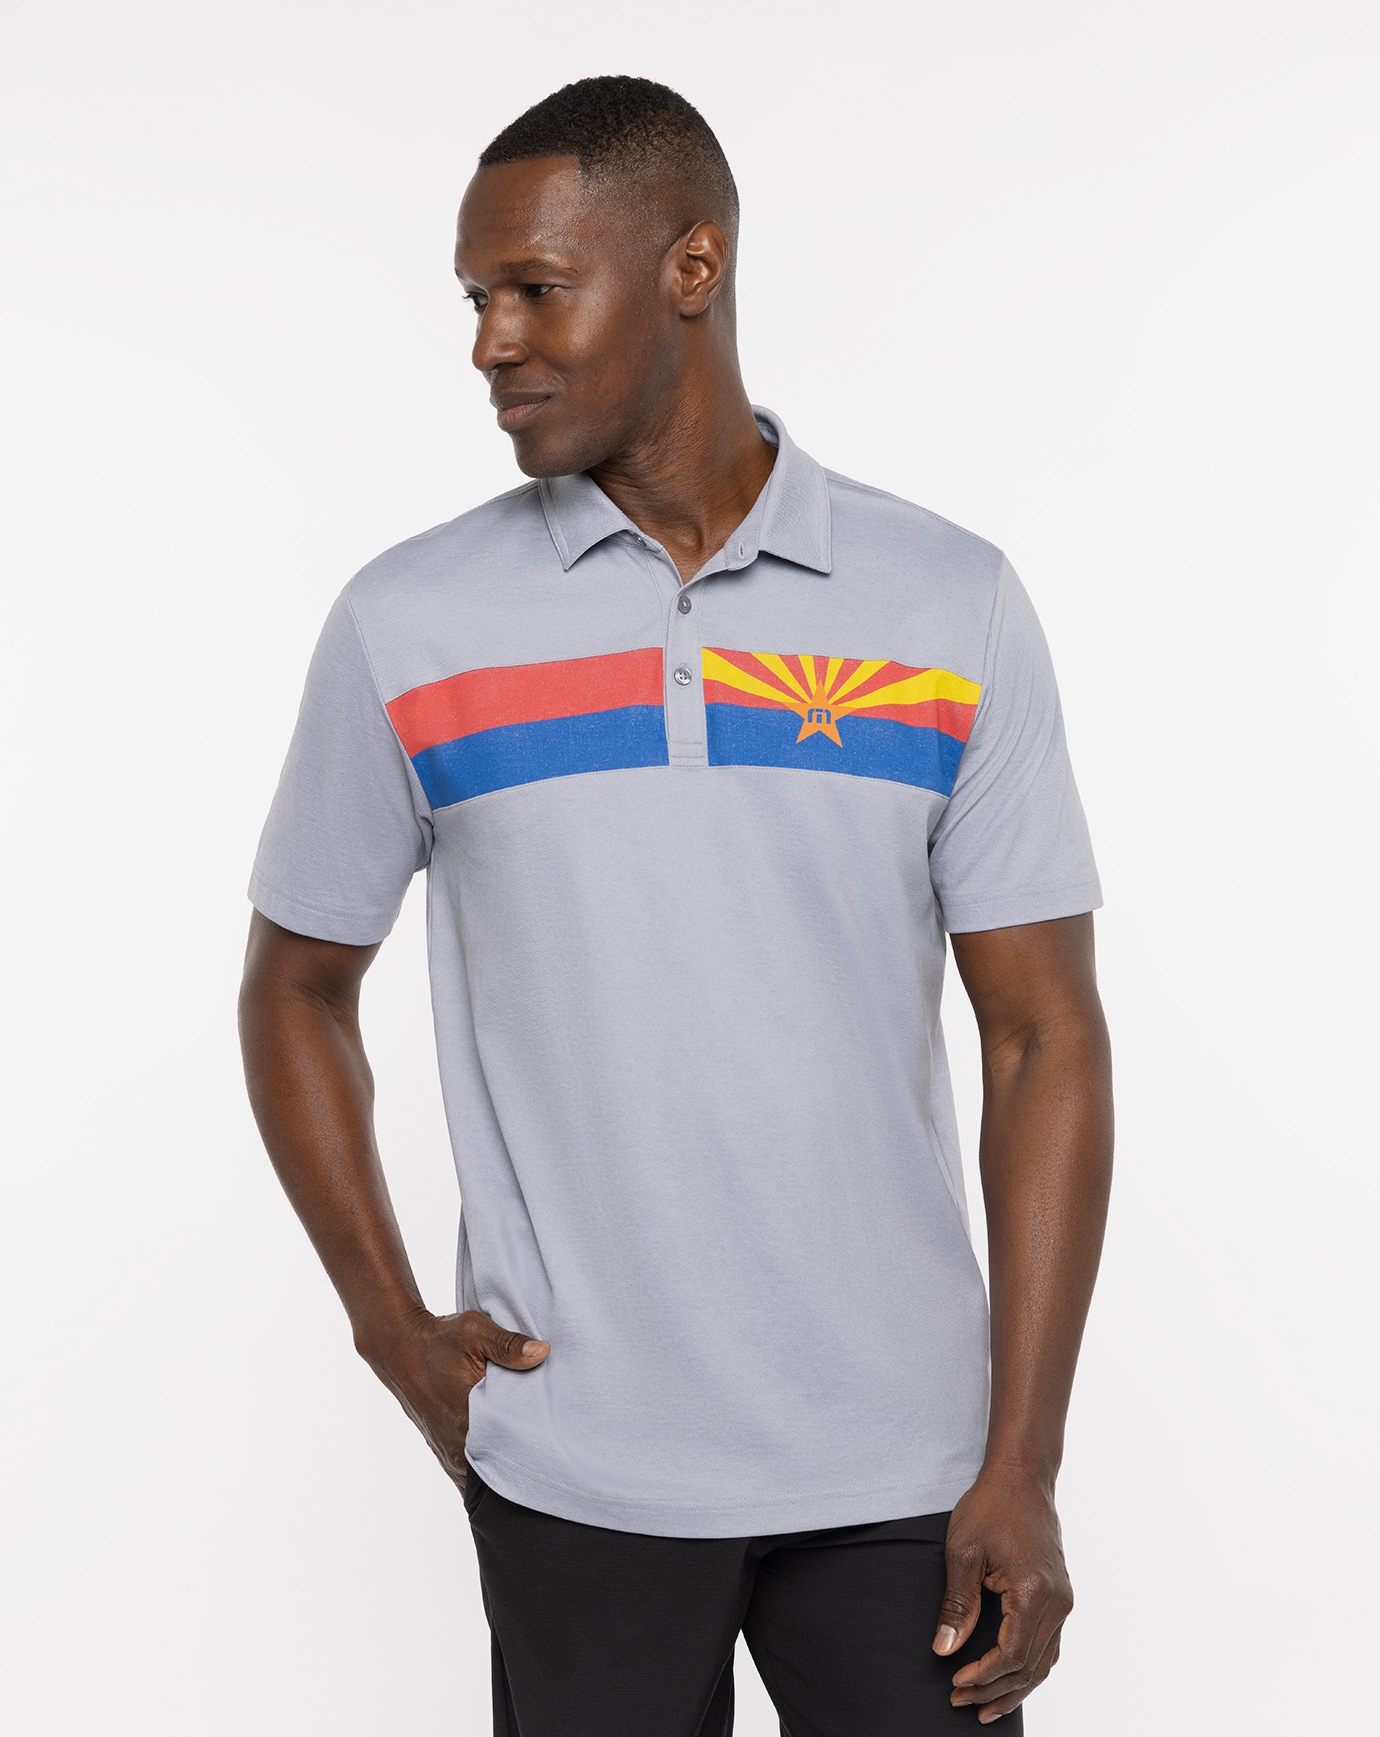 Related Product - GREAT PRESCOTT POLO